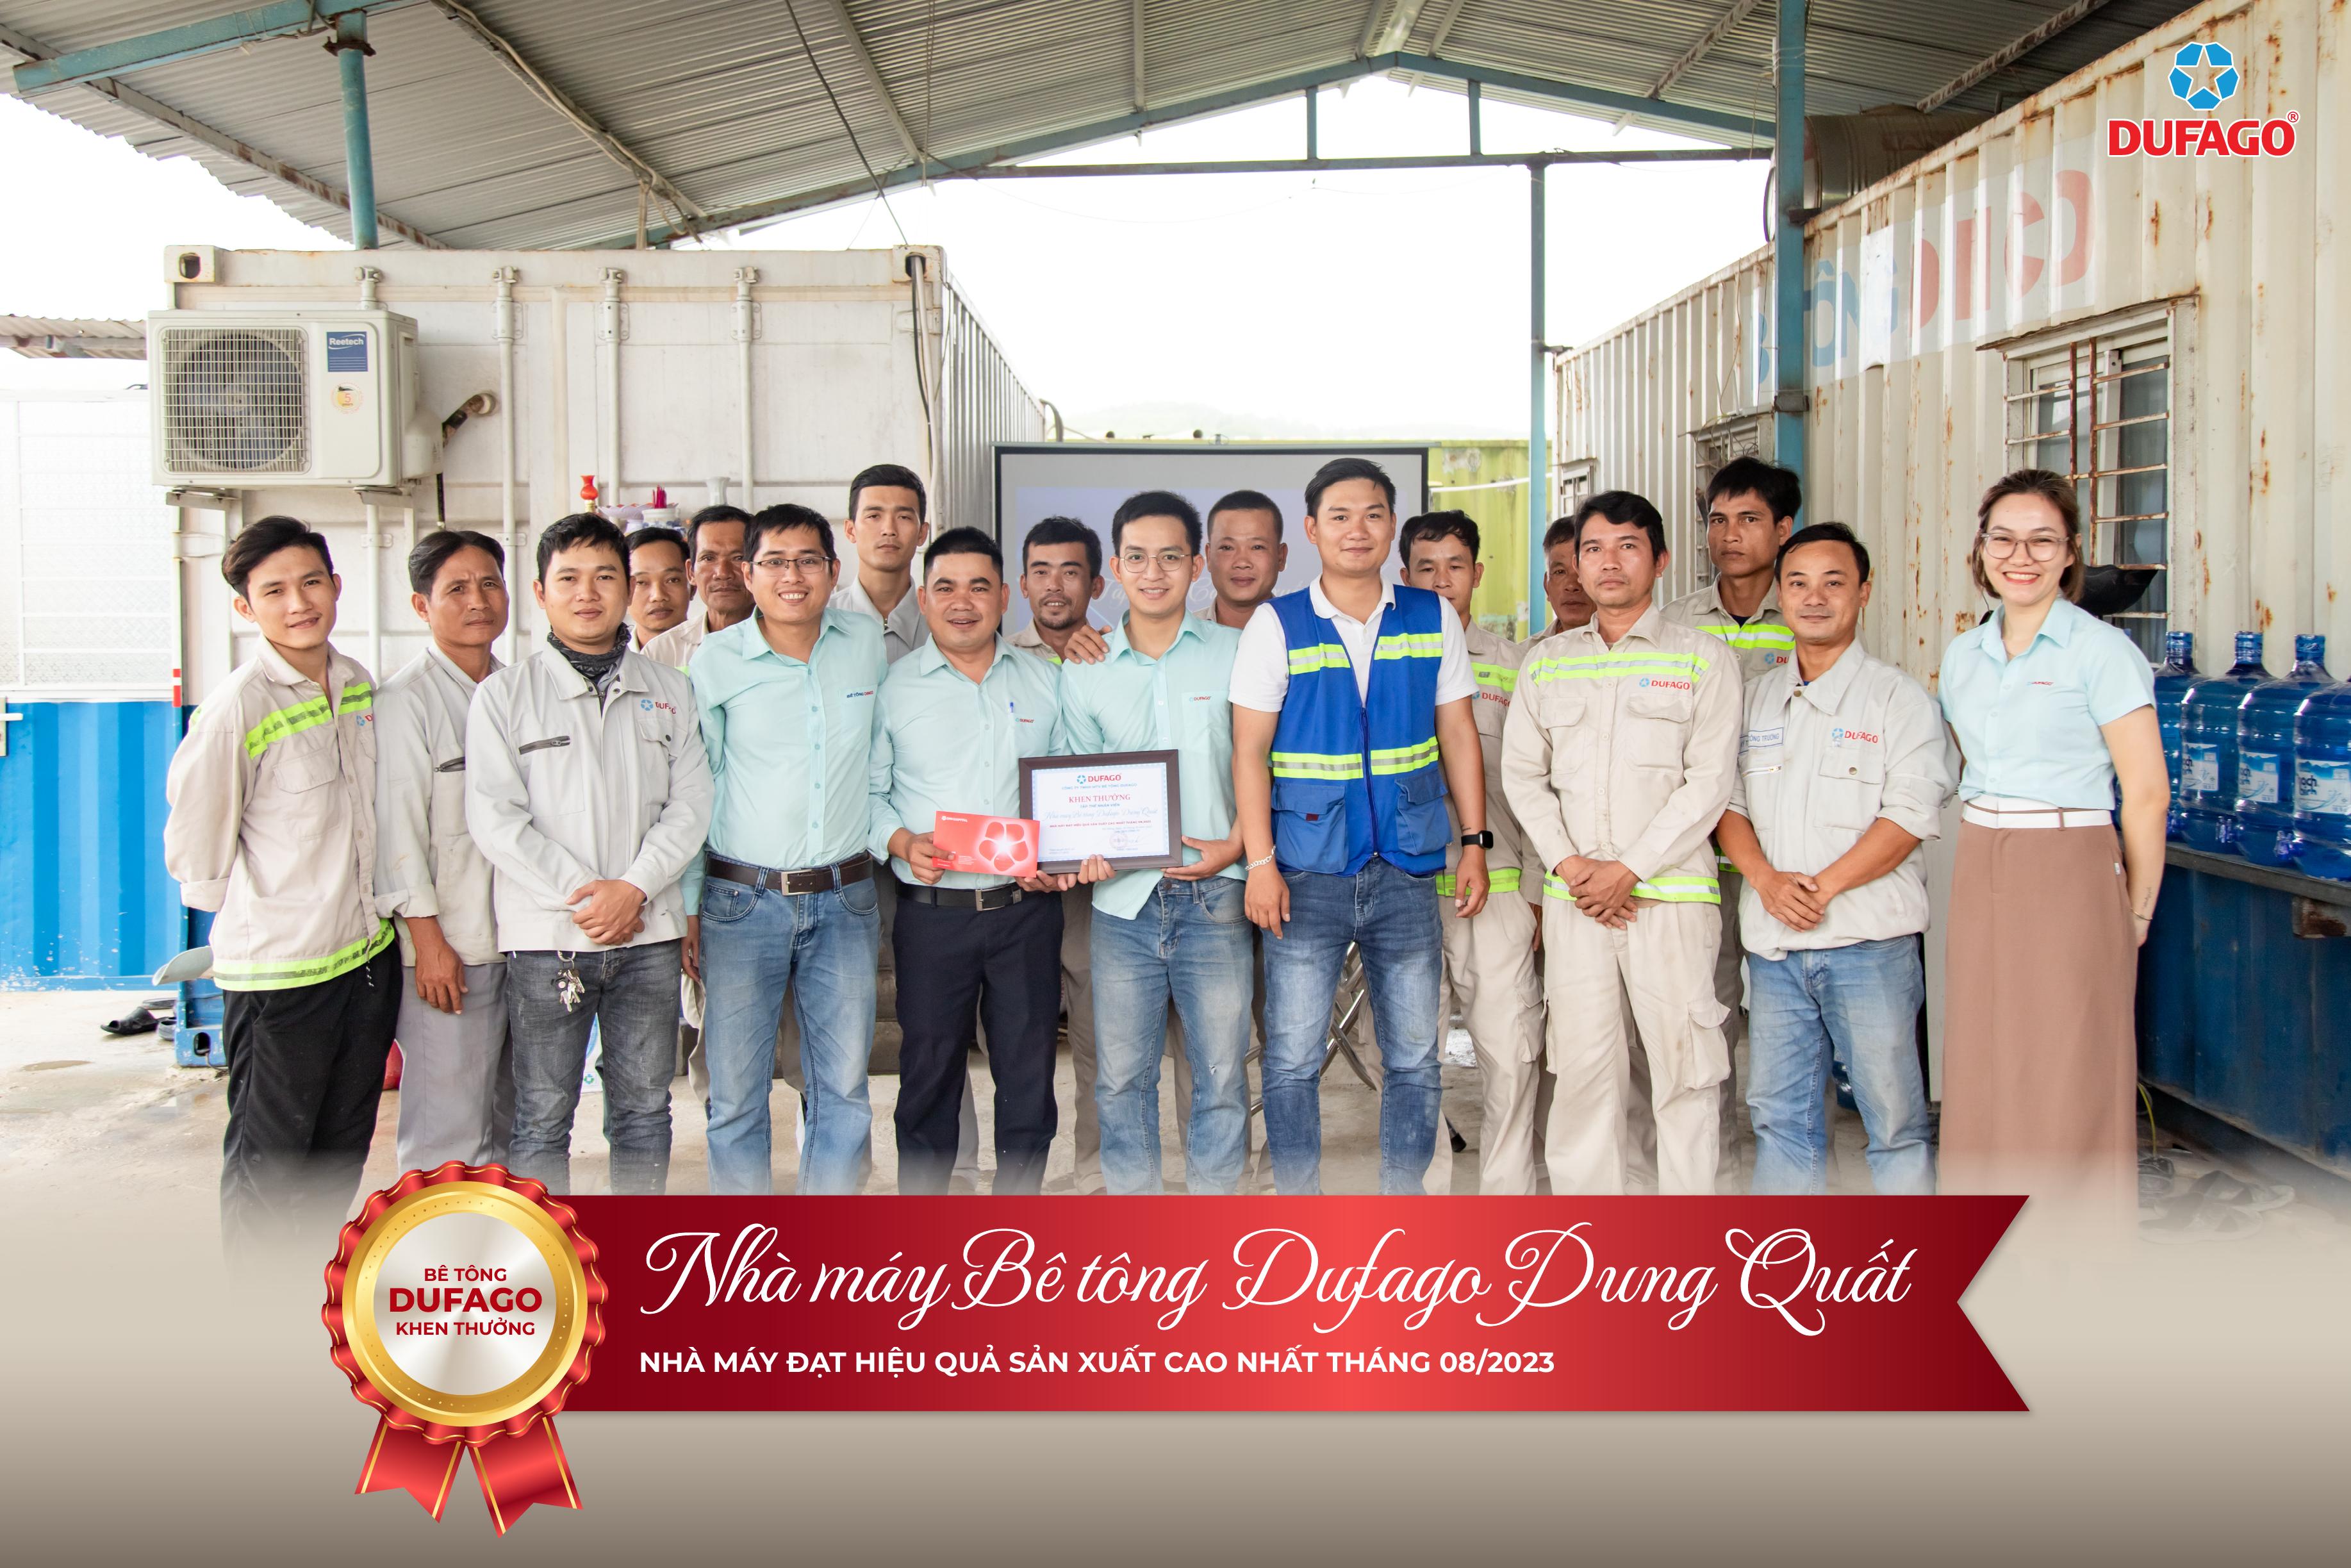 The collective of employees of Dufago Concrete Factory Dung Quat. The factory achieved the highest profit margin to revenue ratio: 7.22%.